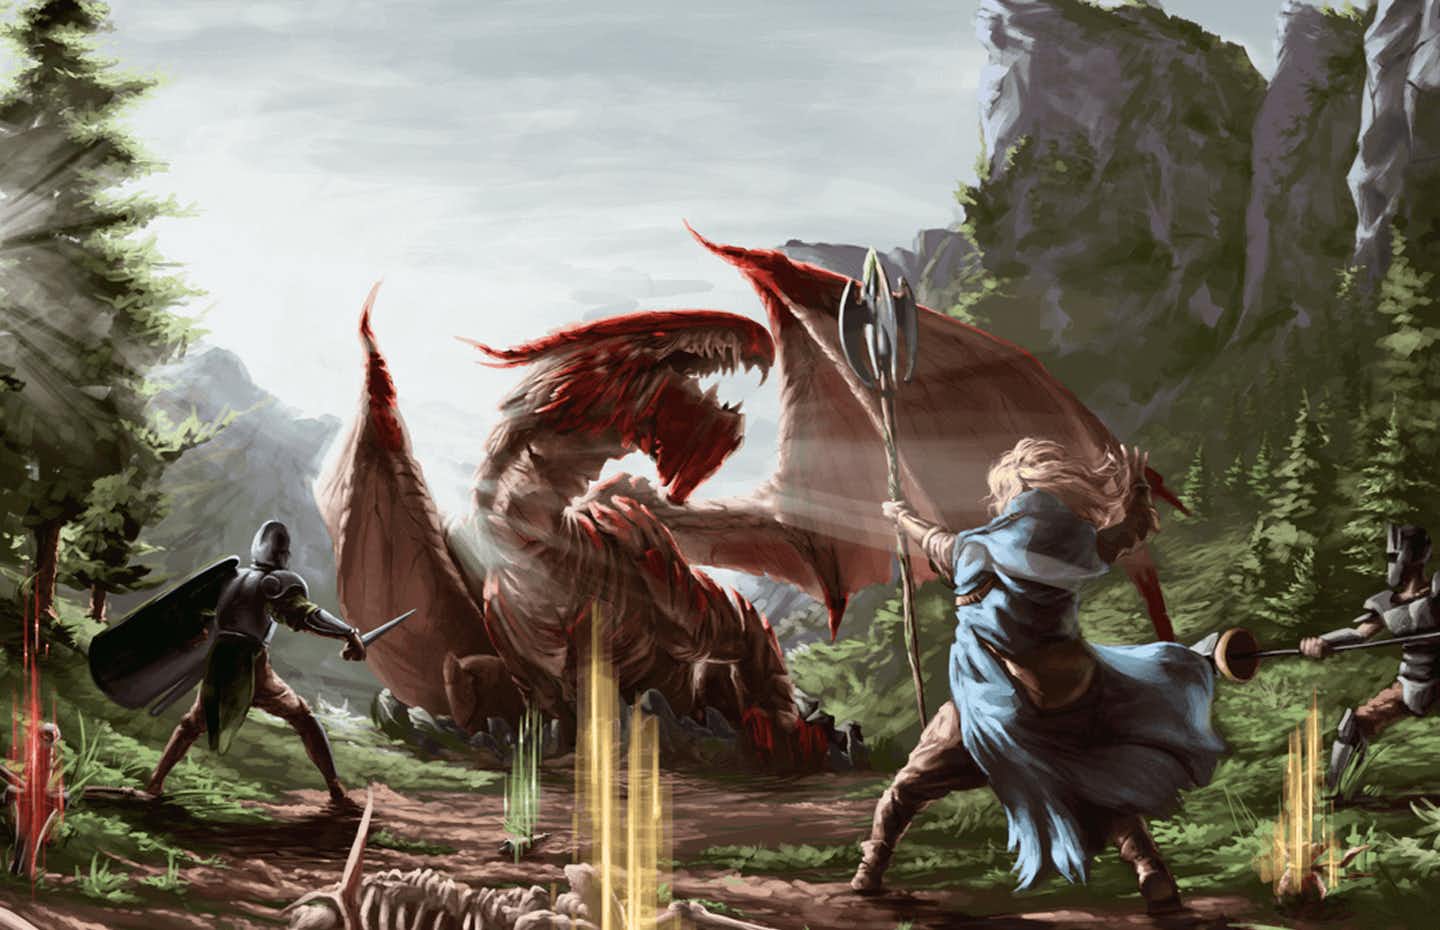 background image of The Six Dragons